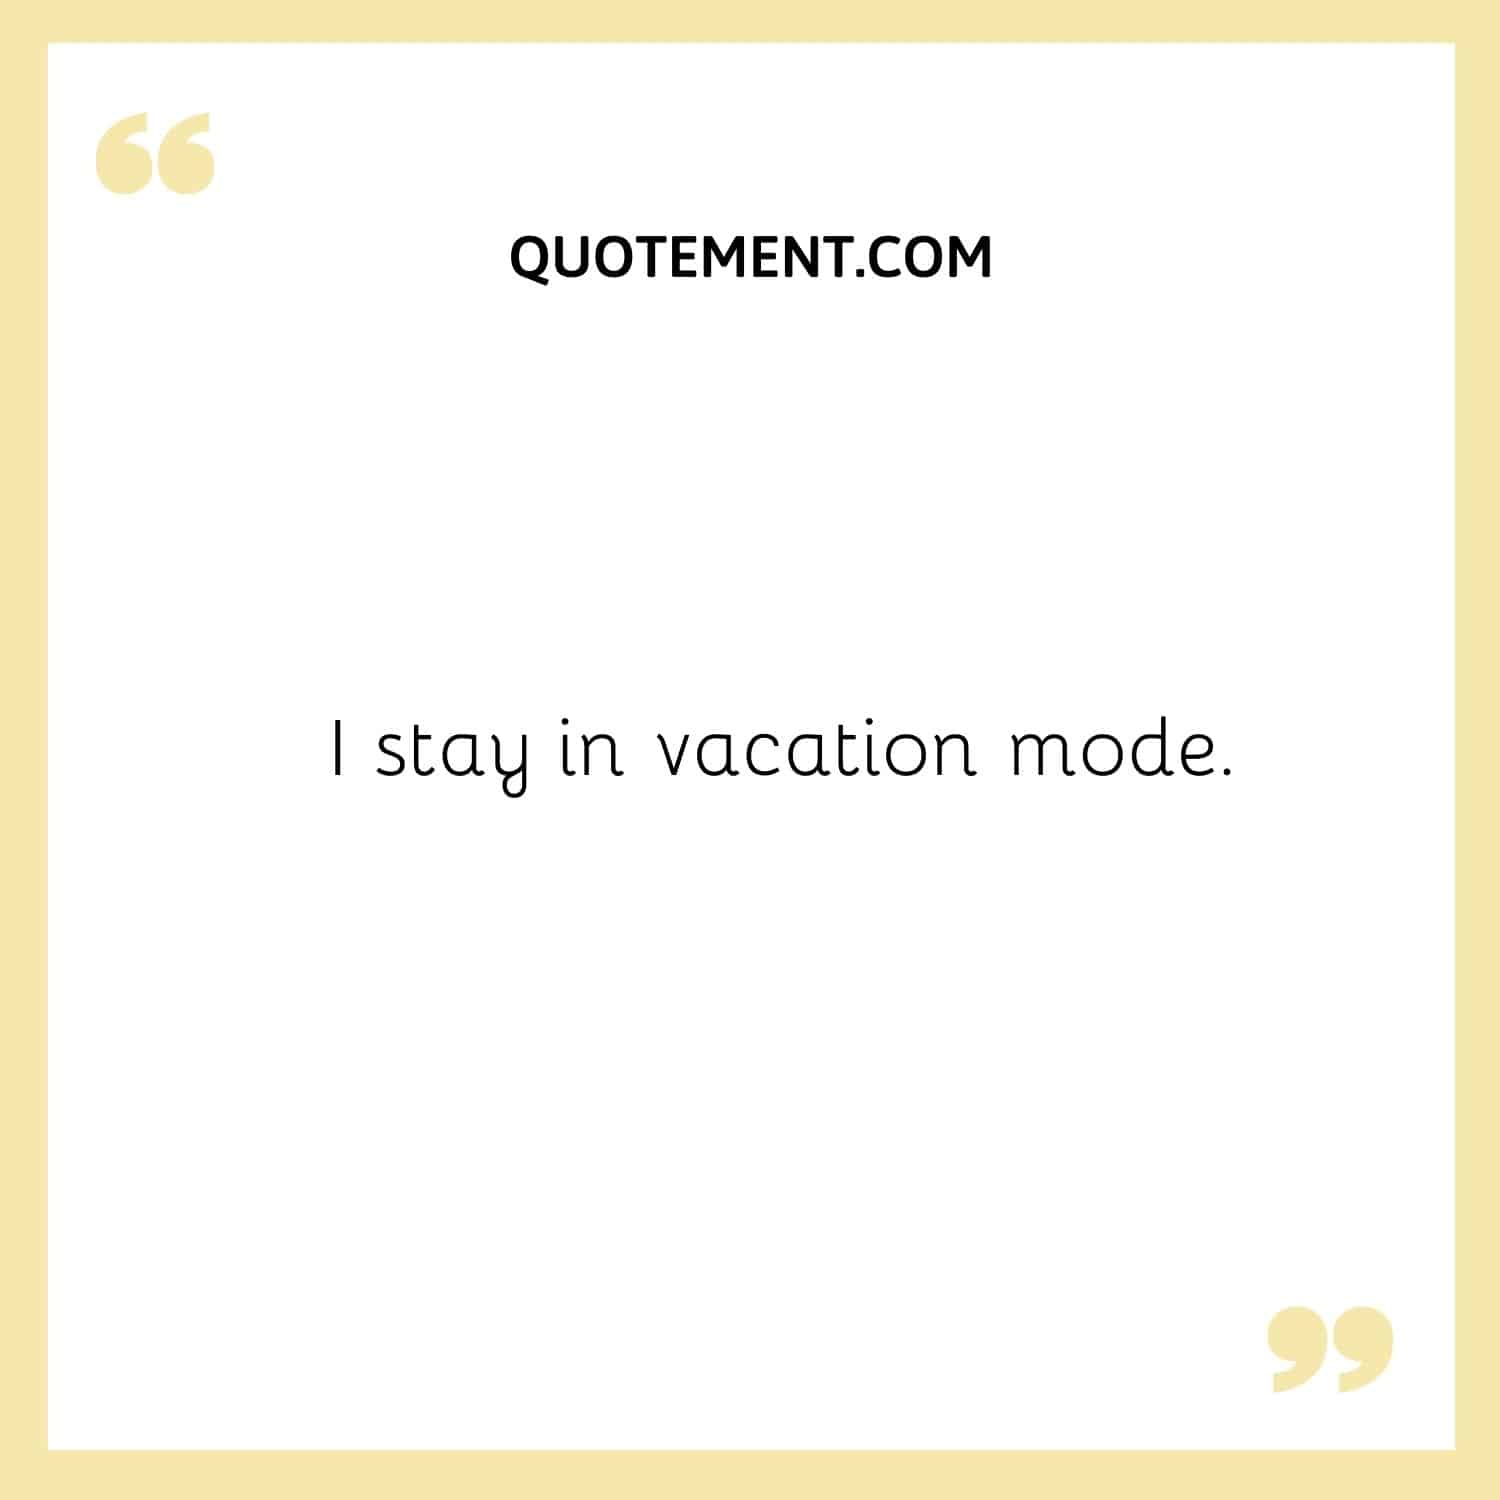 I stay in vacation mode.